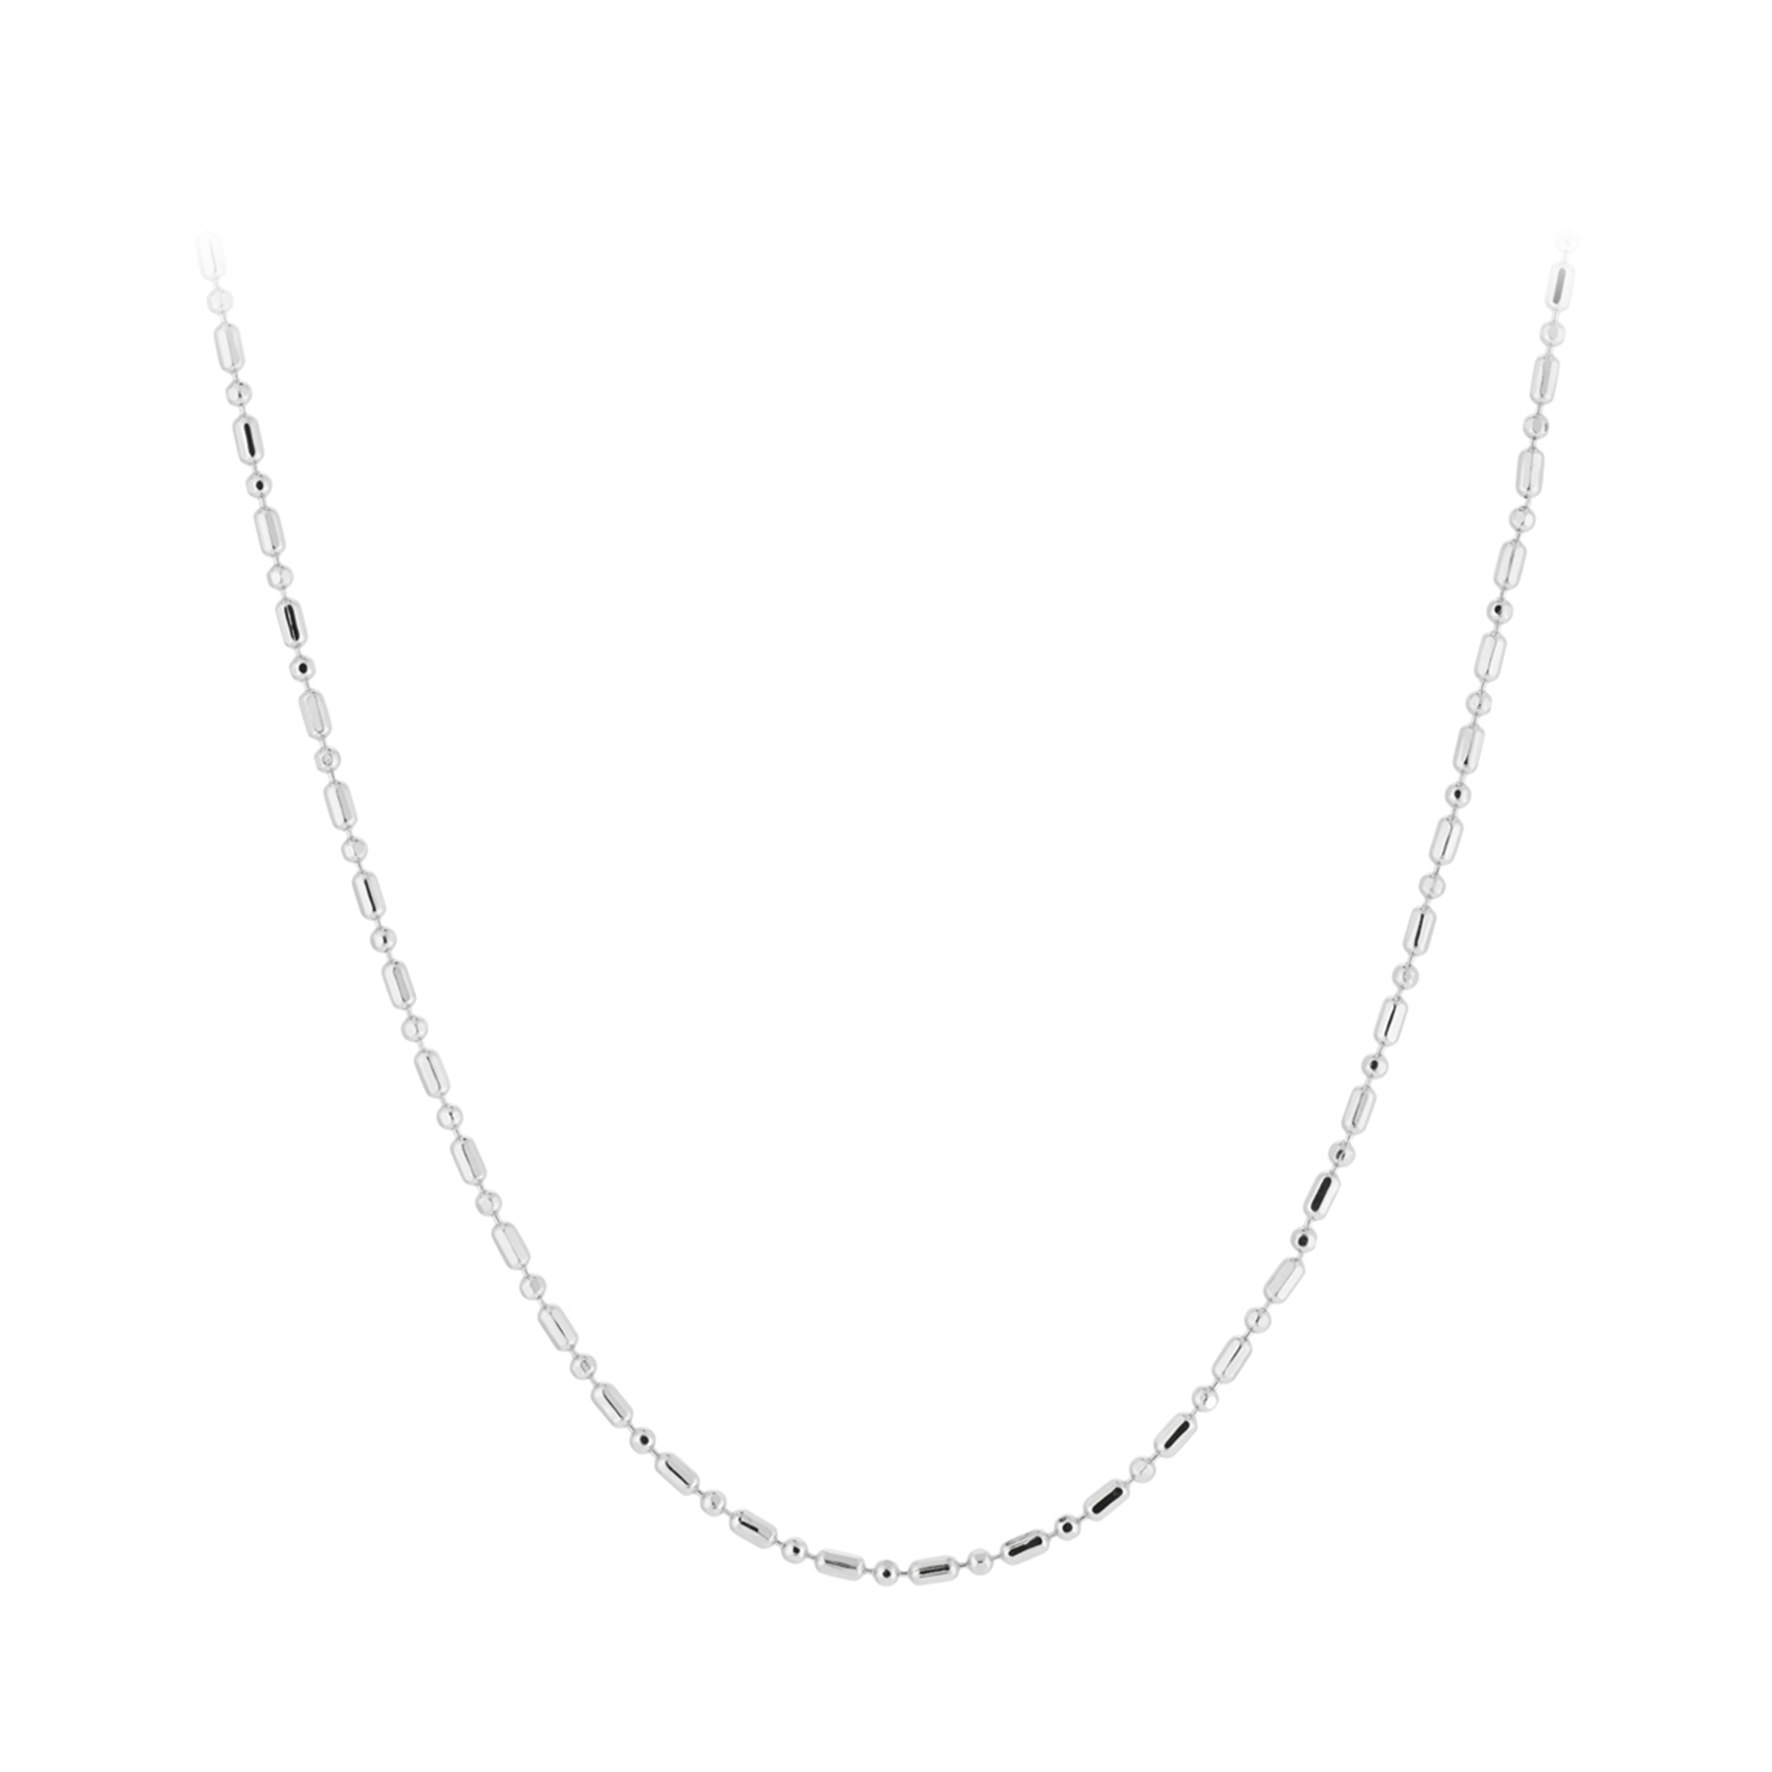 Evelyn Necklace von Pernille Corydon in Silber Sterling 925